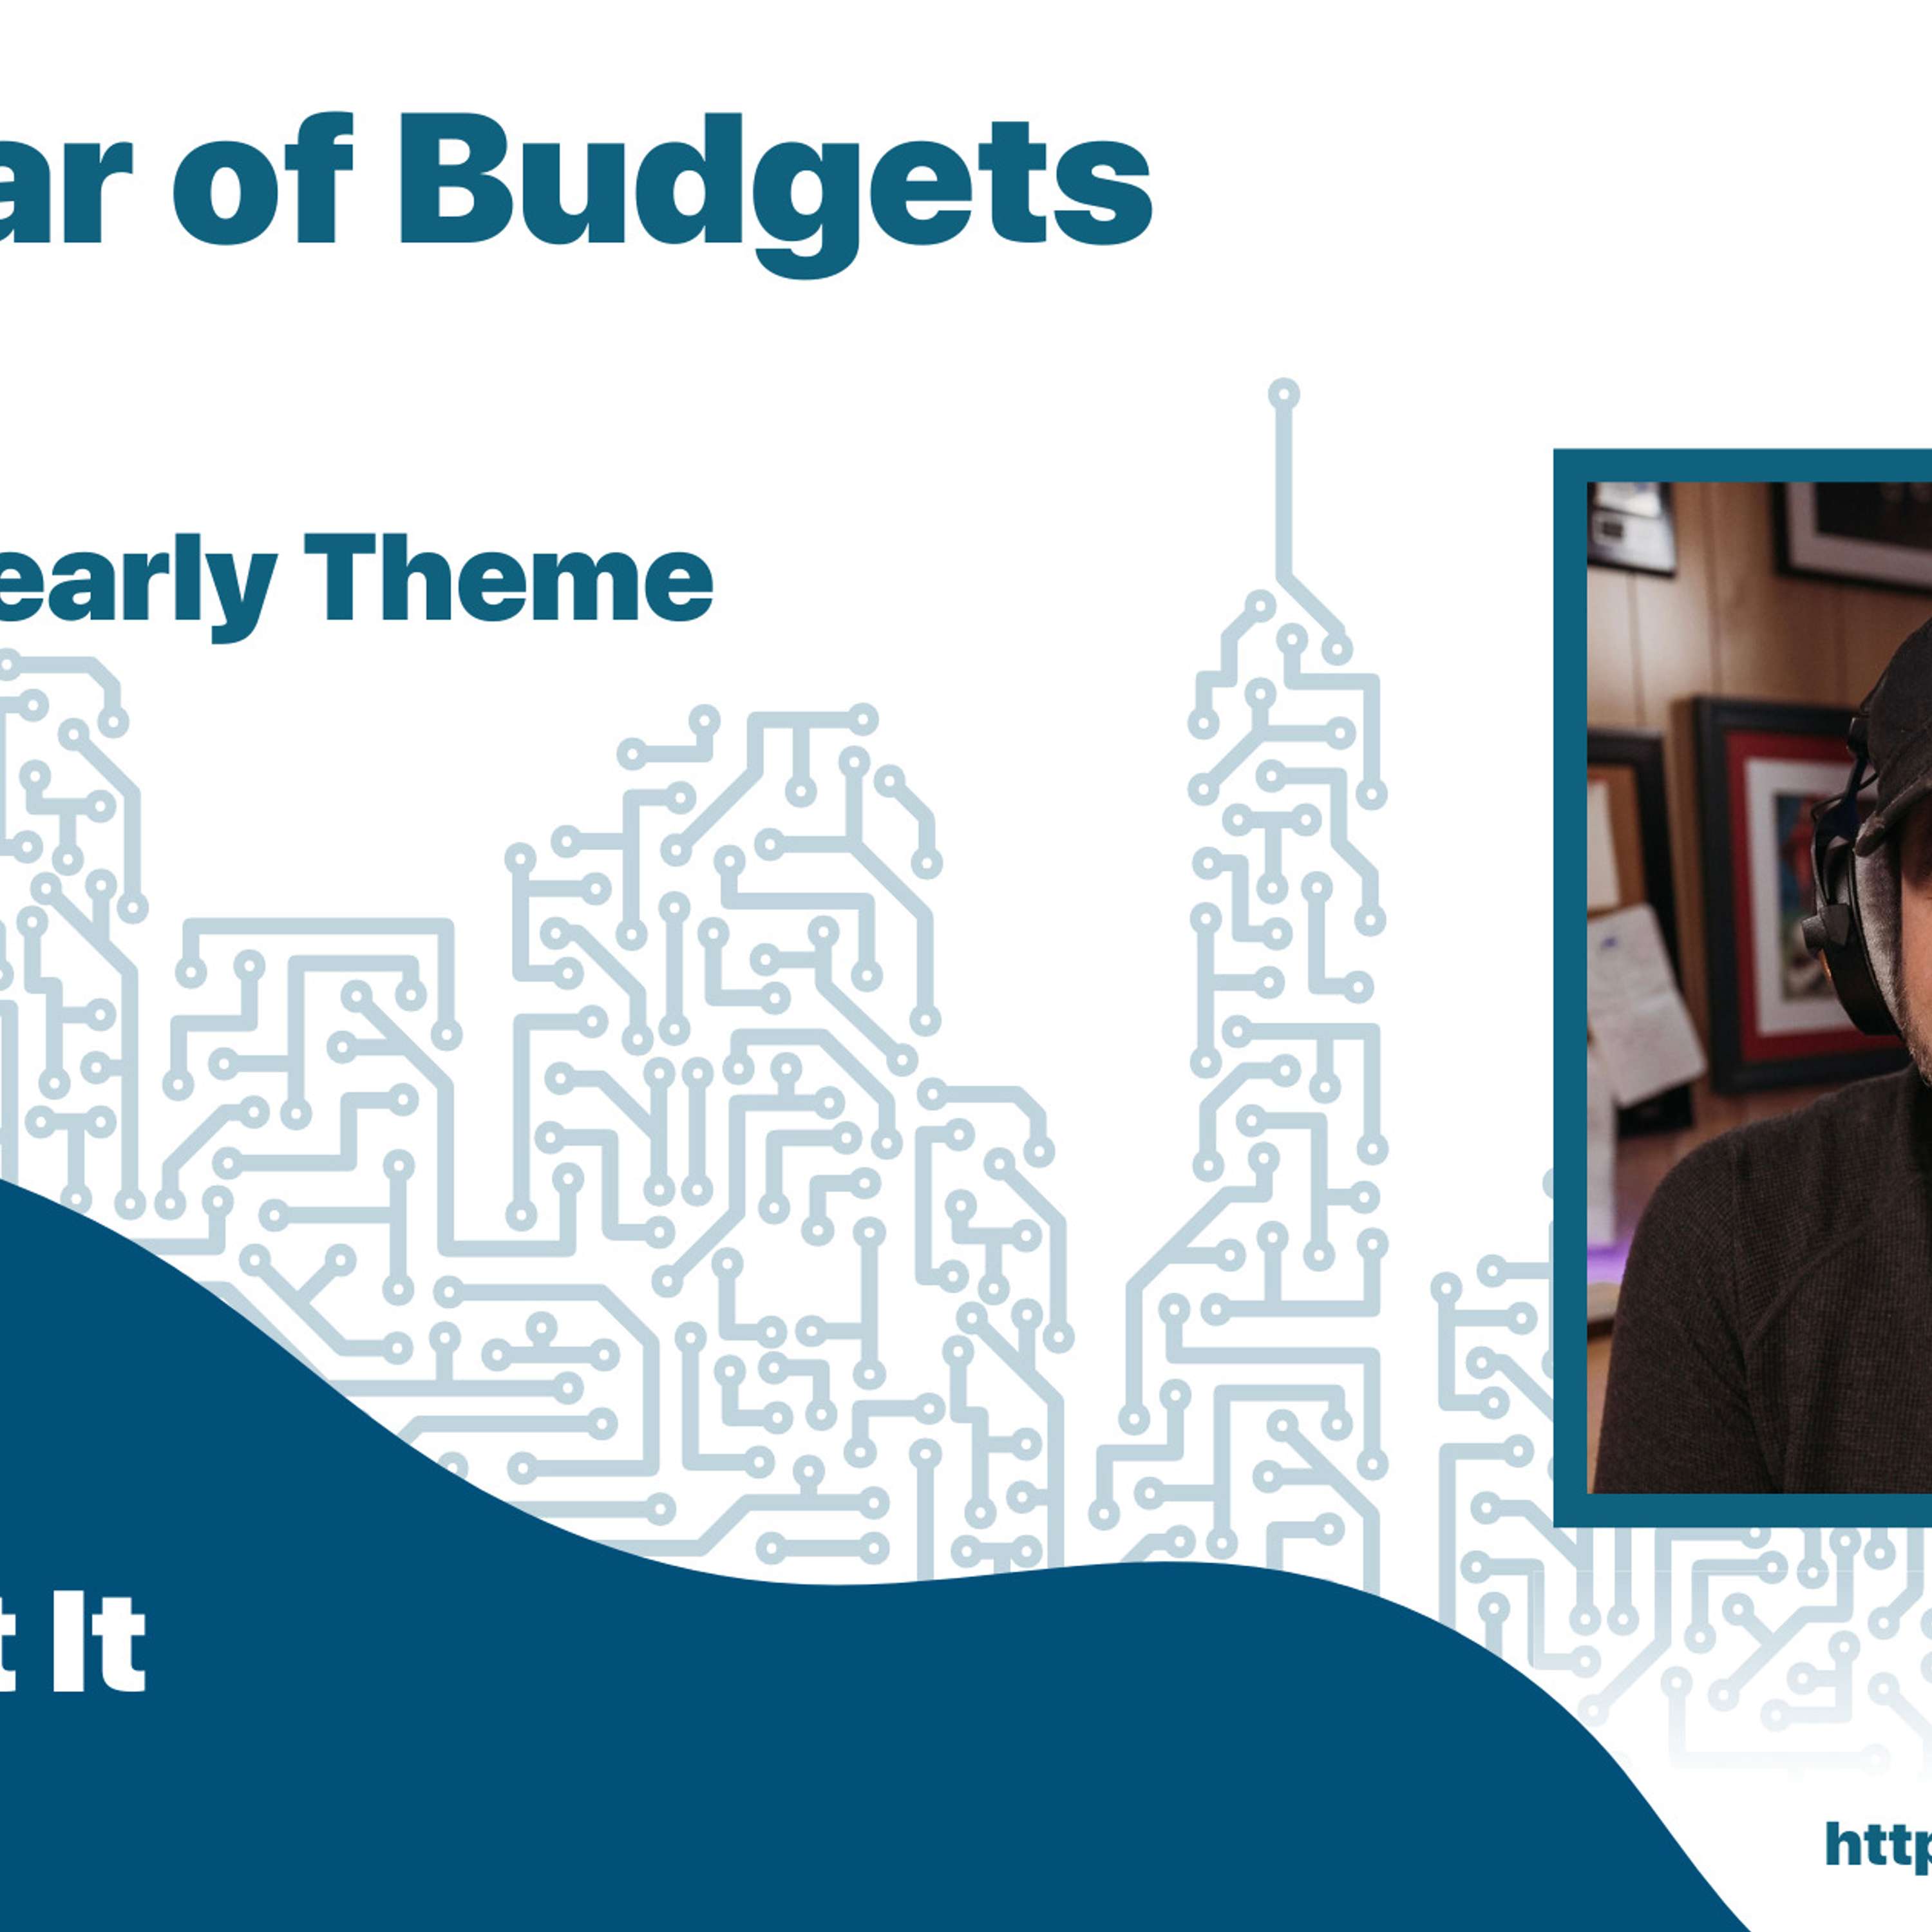 The Year of Budgets